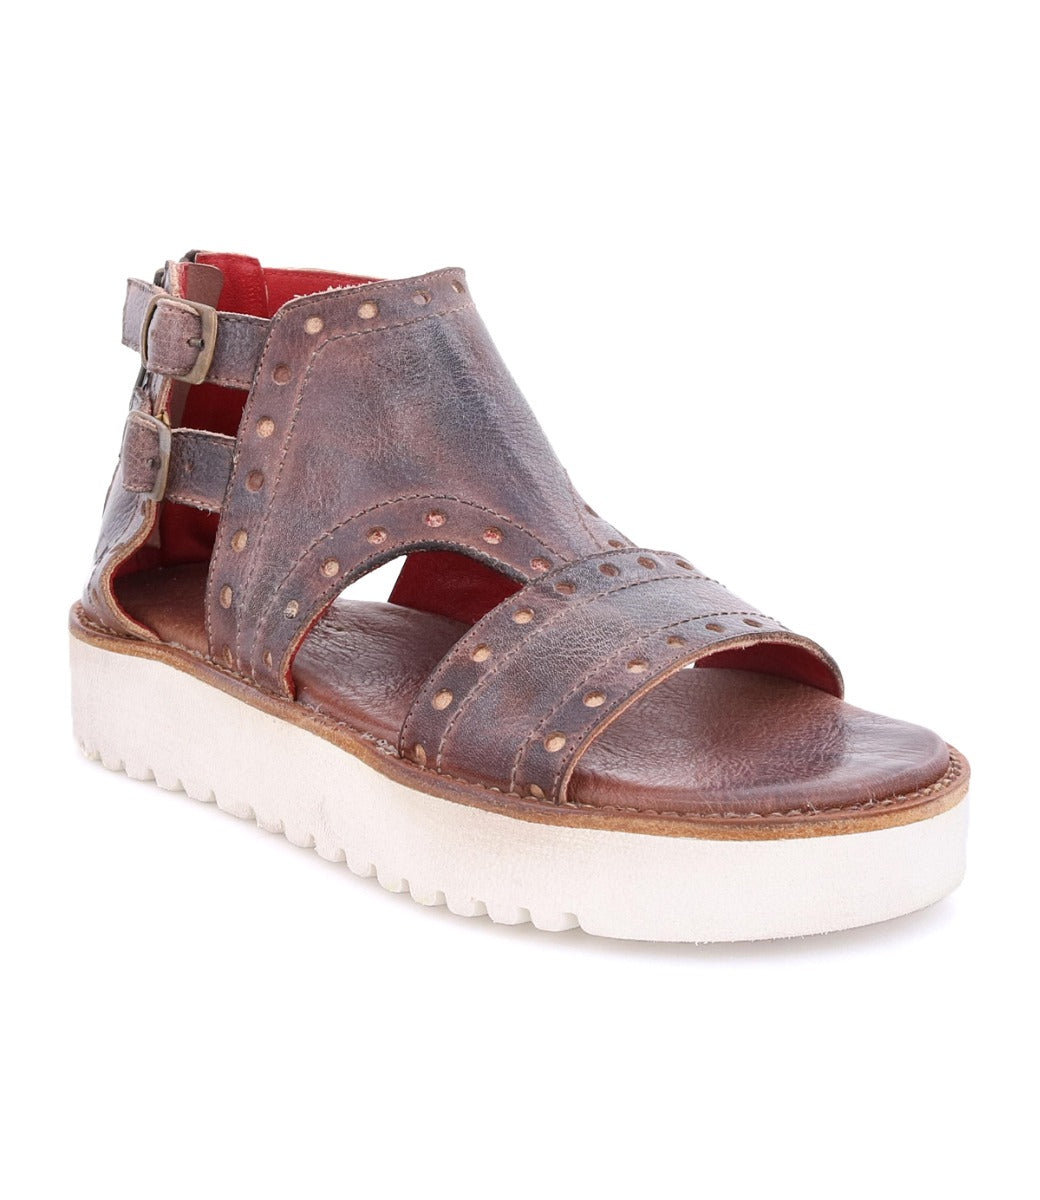 A women's brown Camden sandal with studded straps and a white sole by Bed Stu.